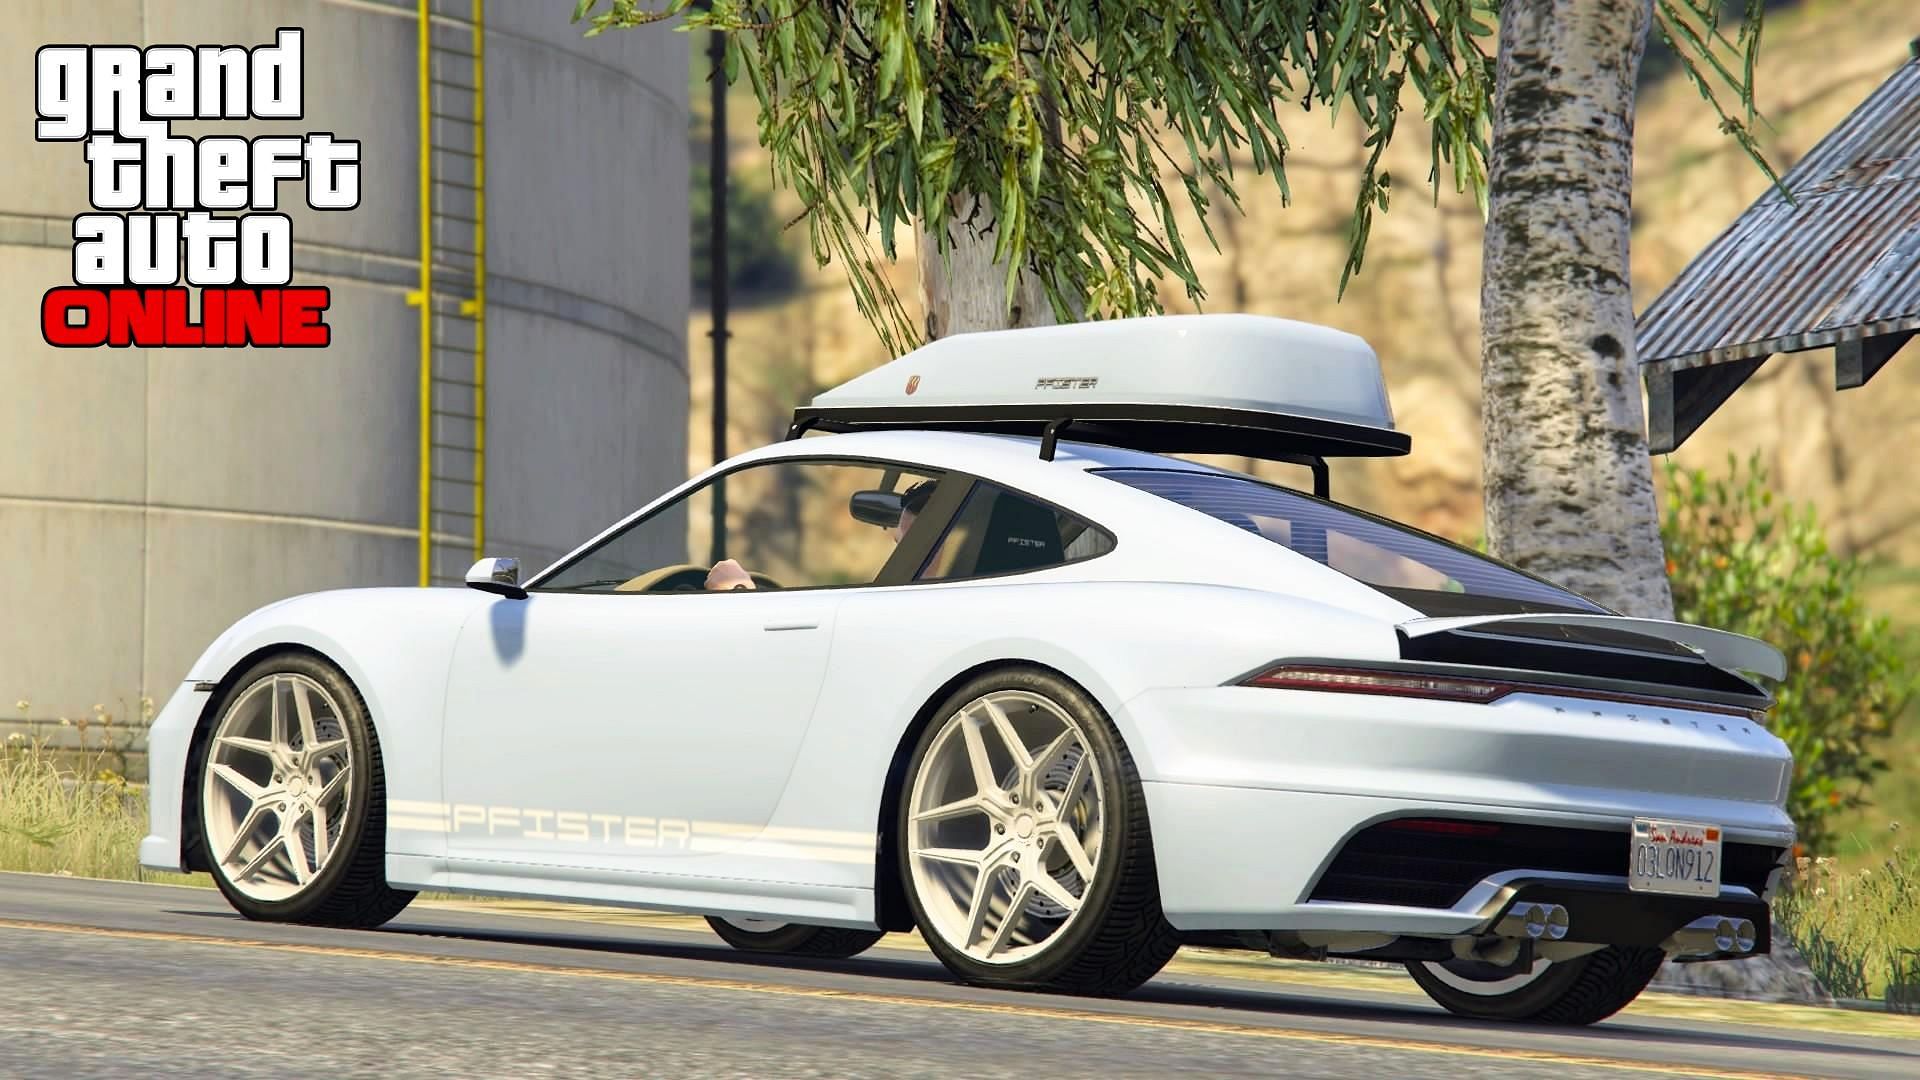 The Comet S2 is one of the best vehicles to own in GTA Online (Image via KubboGaming)